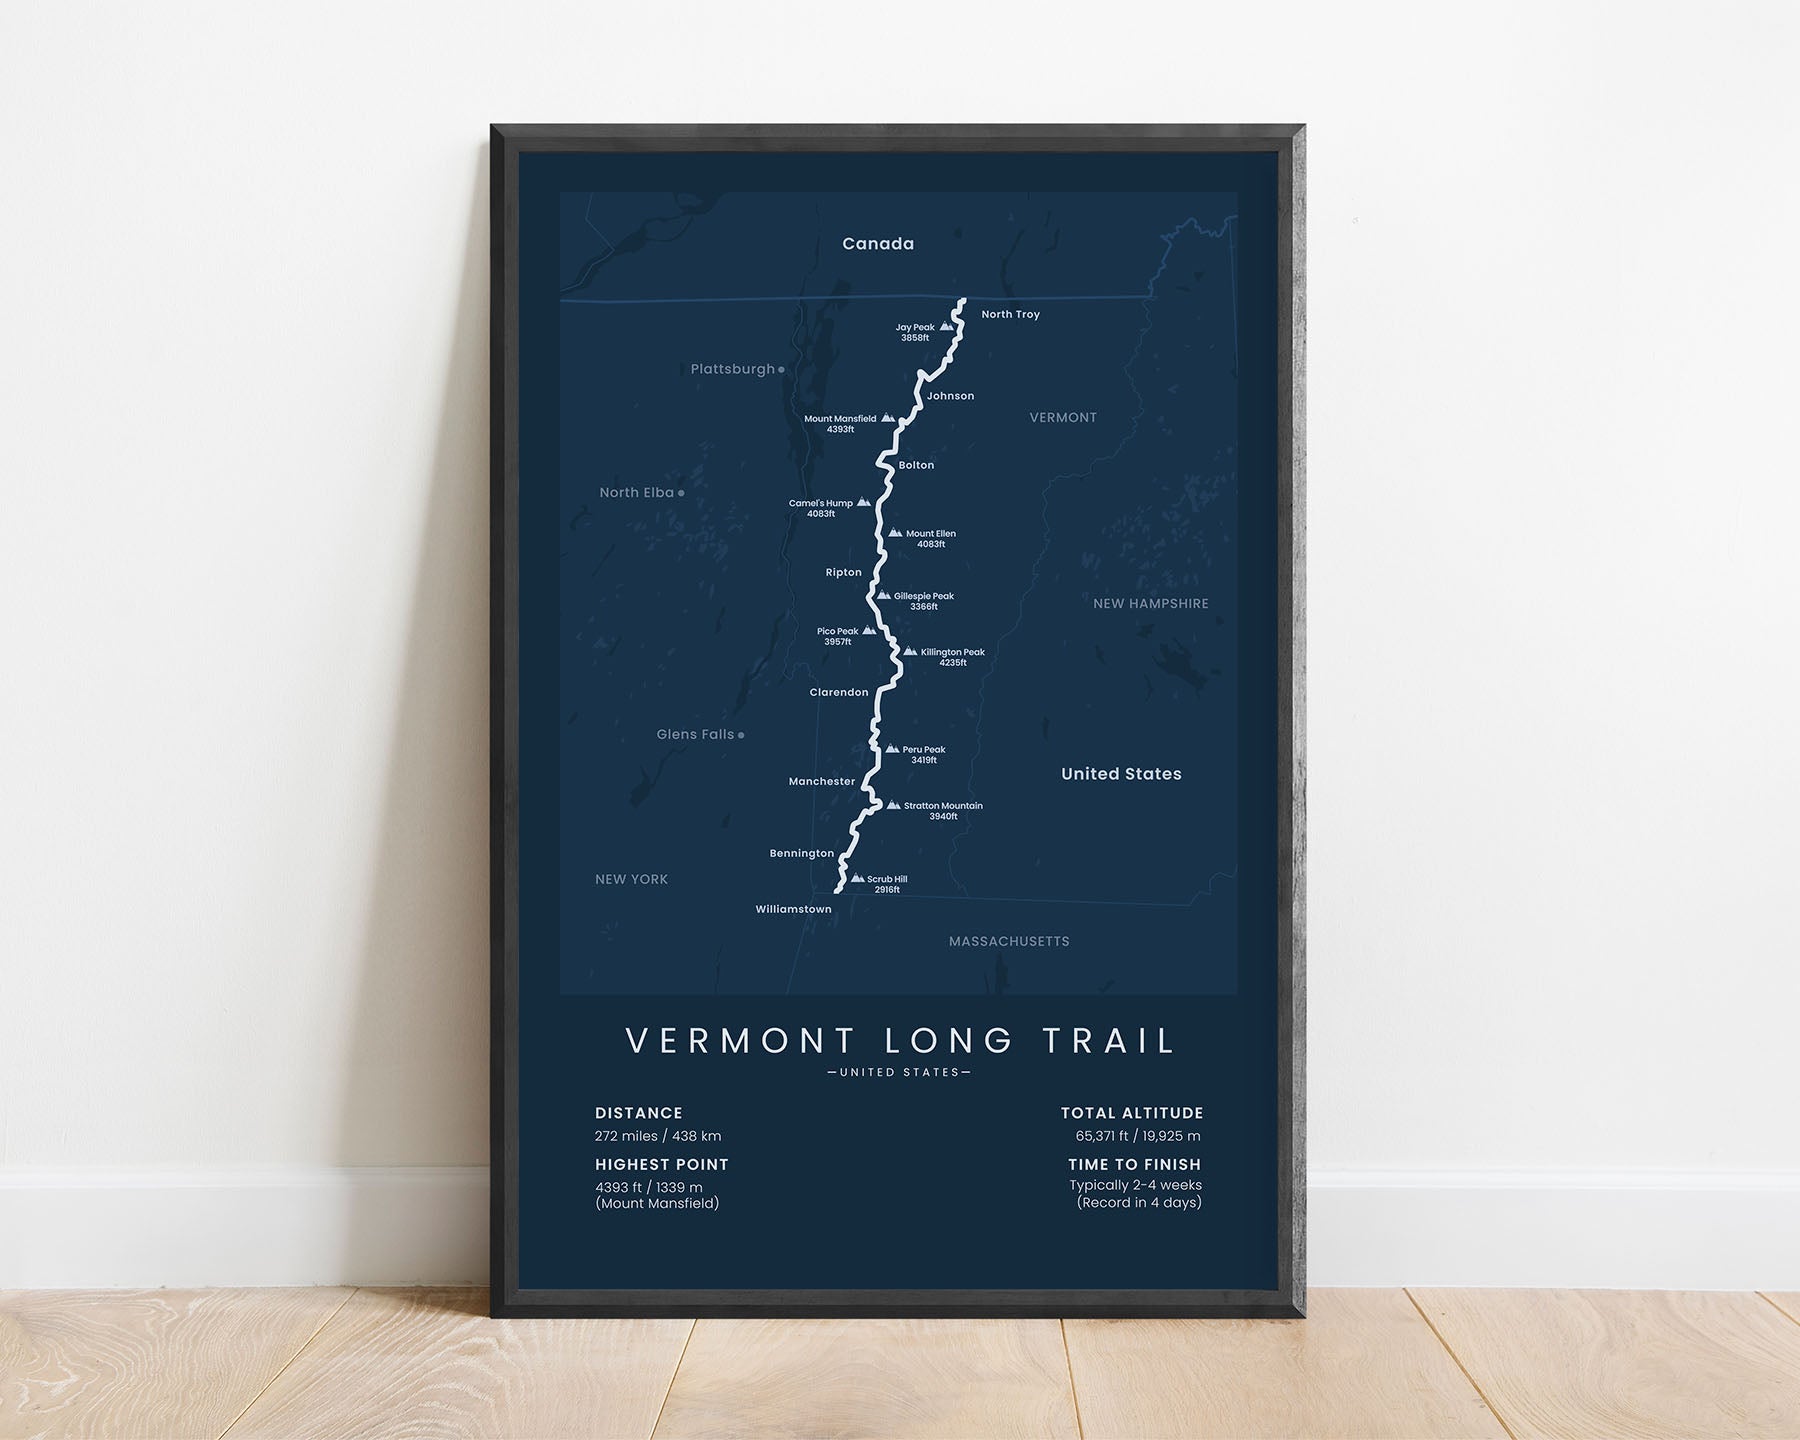 Vermont Long Trail thru hike wall art with blue background (Massachusets to Canada)